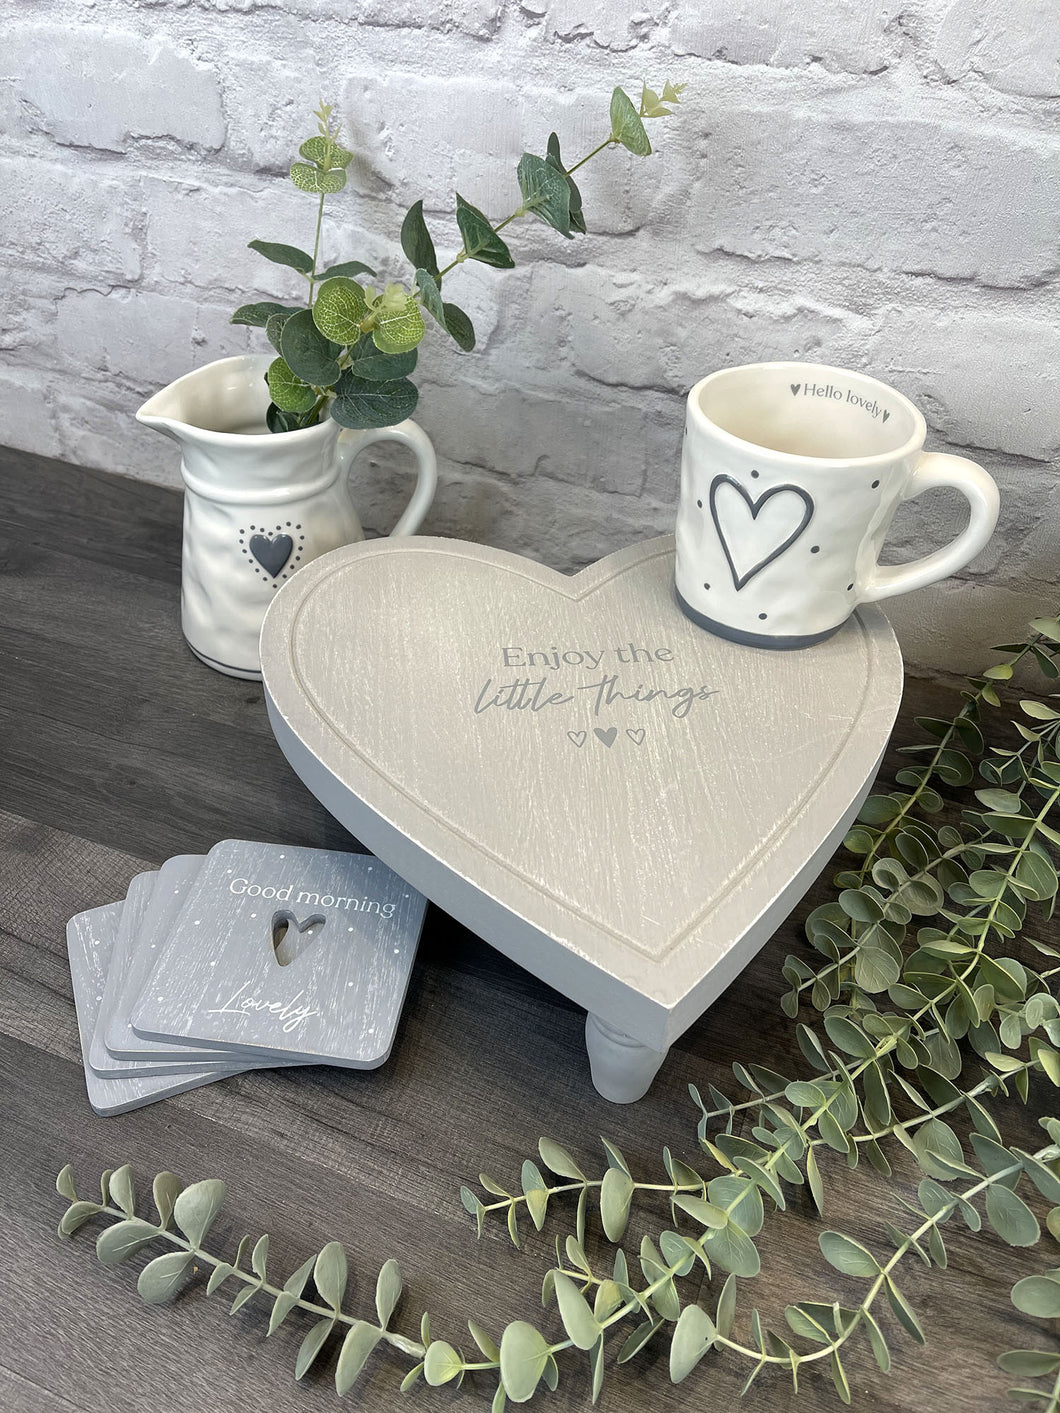 Grey Heart 'Enjoy The Little Things' Display Table